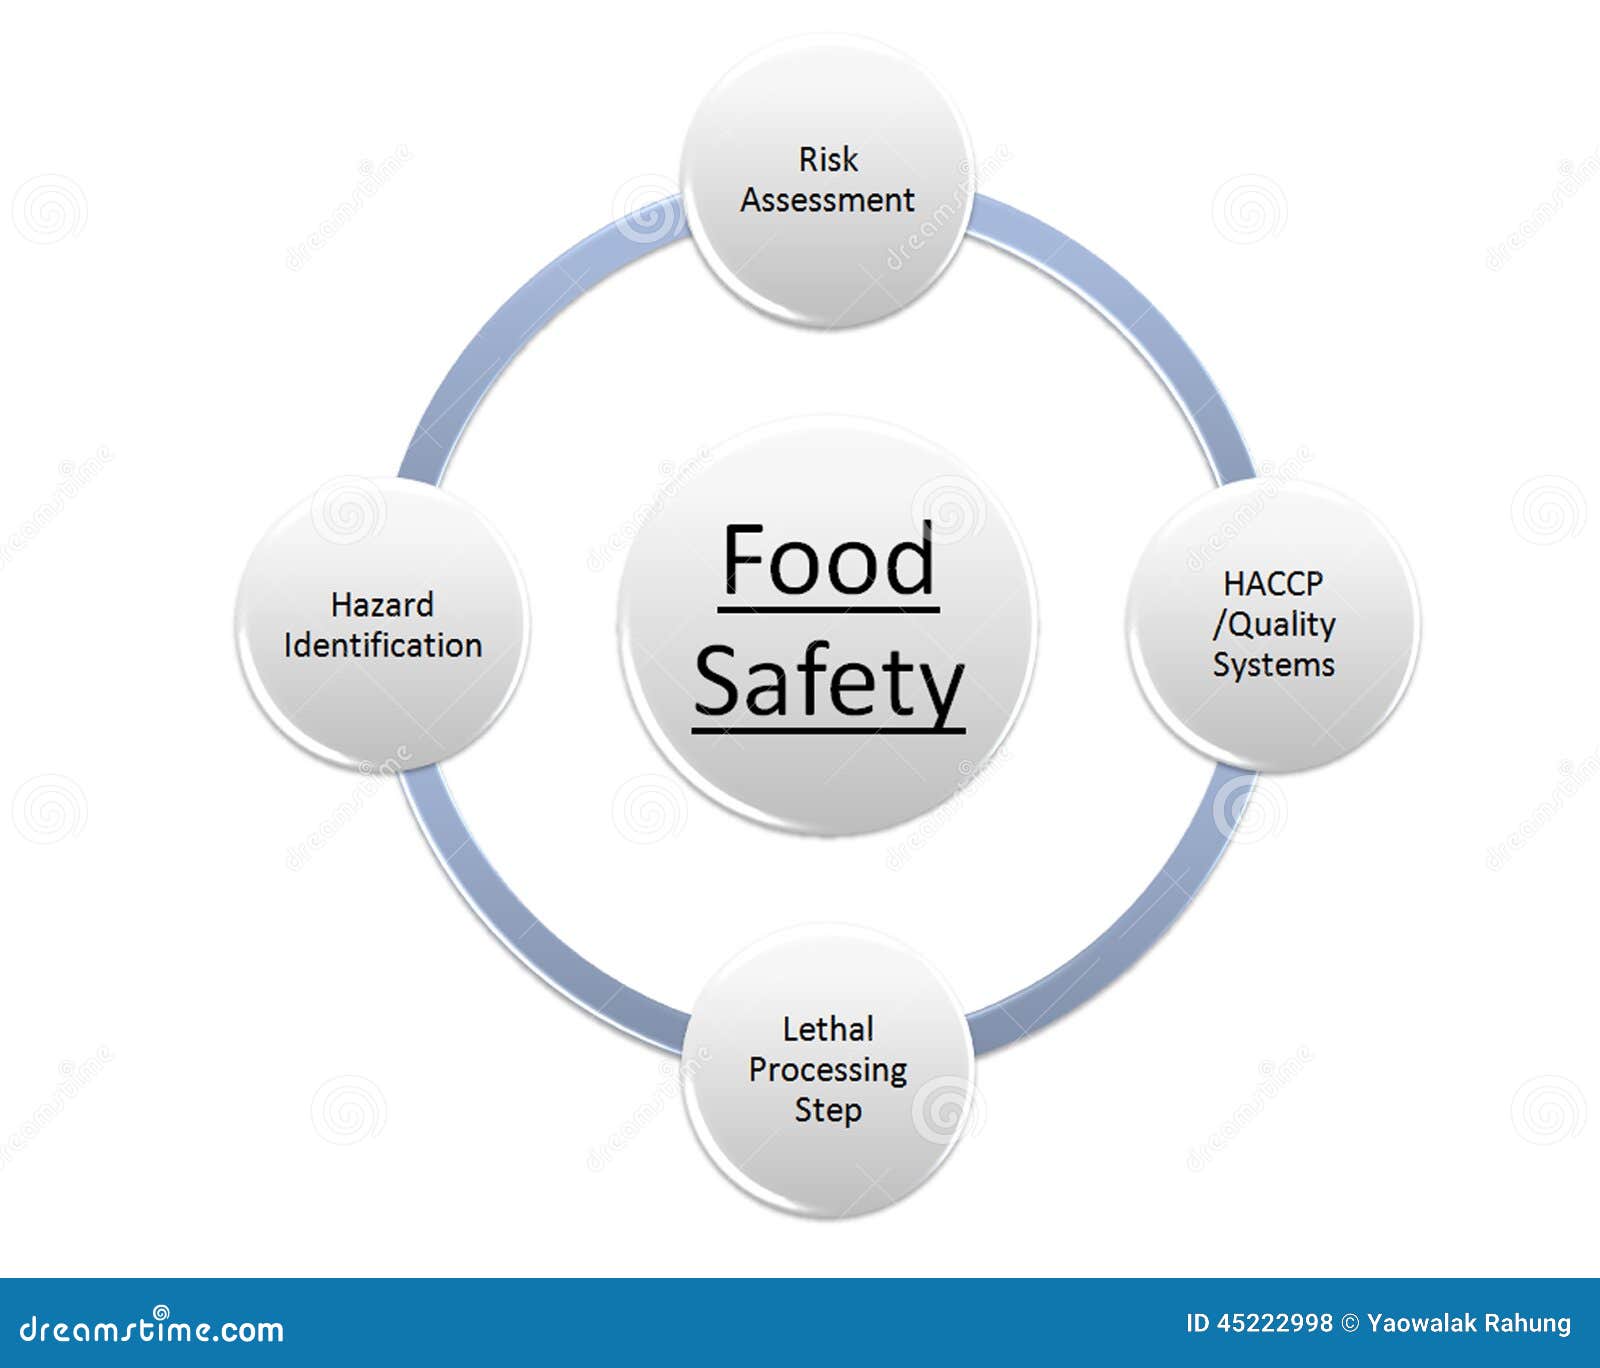 food processing business plans